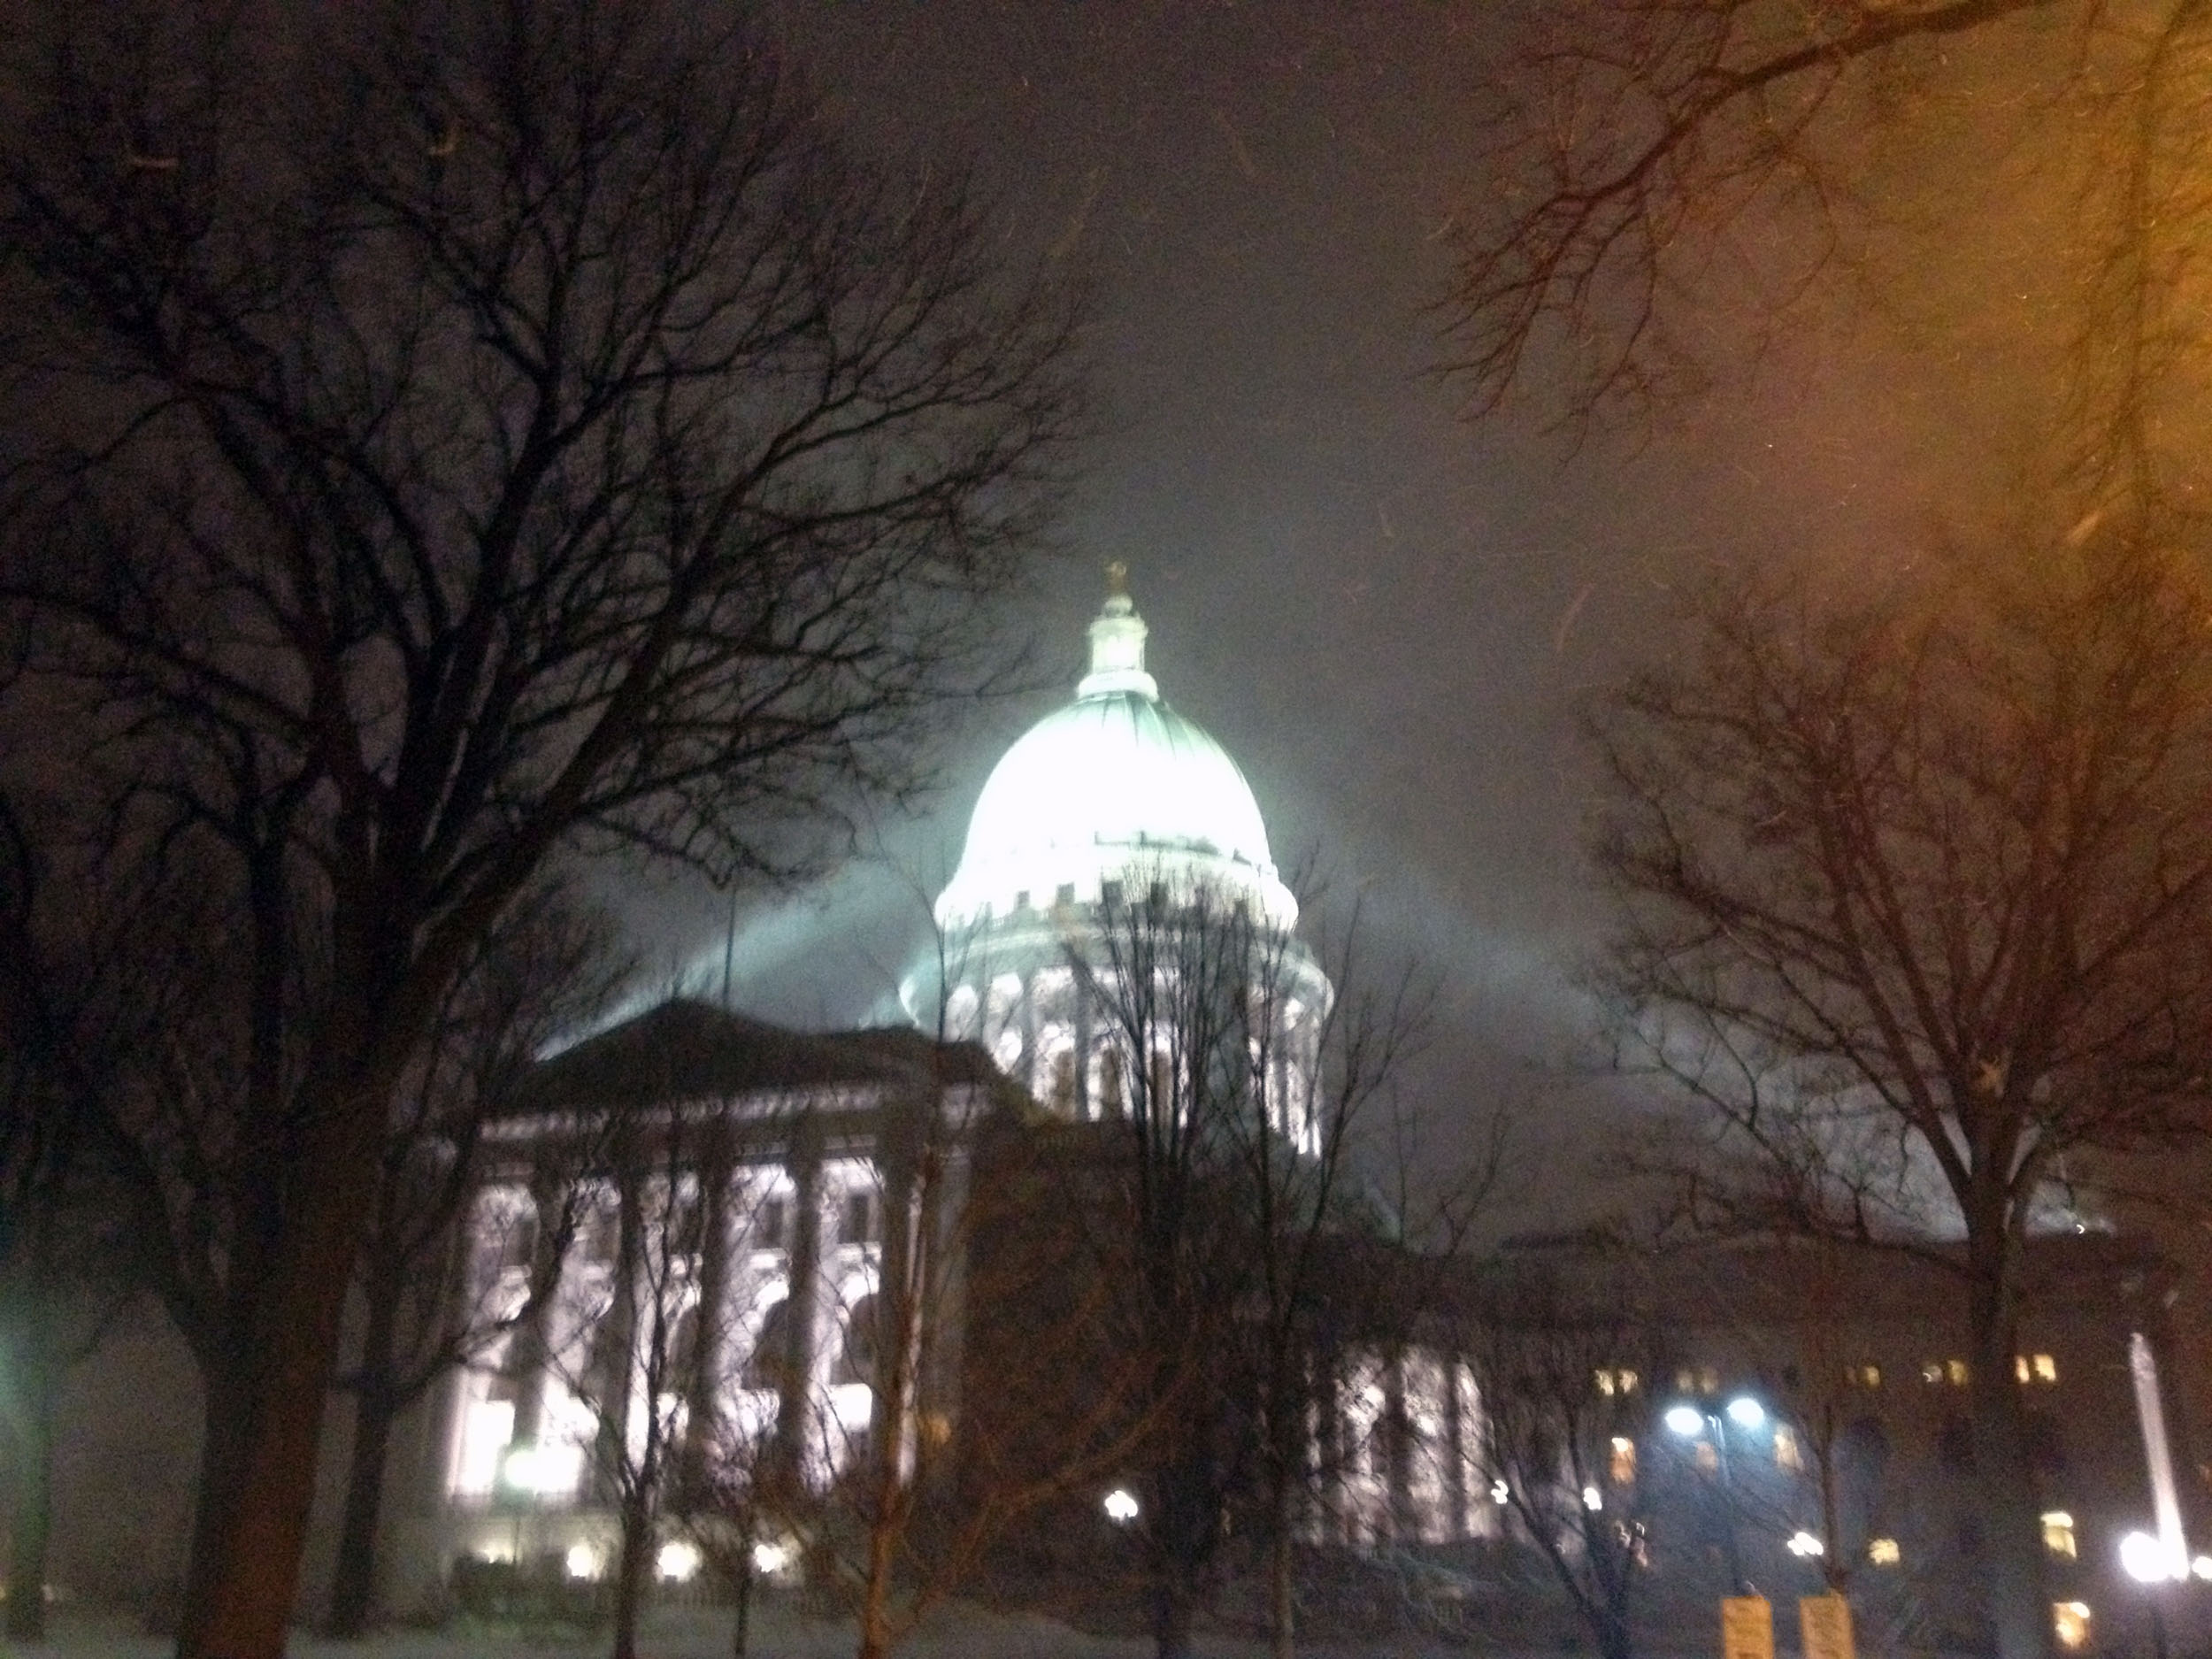 Snowstorm on the Capitol